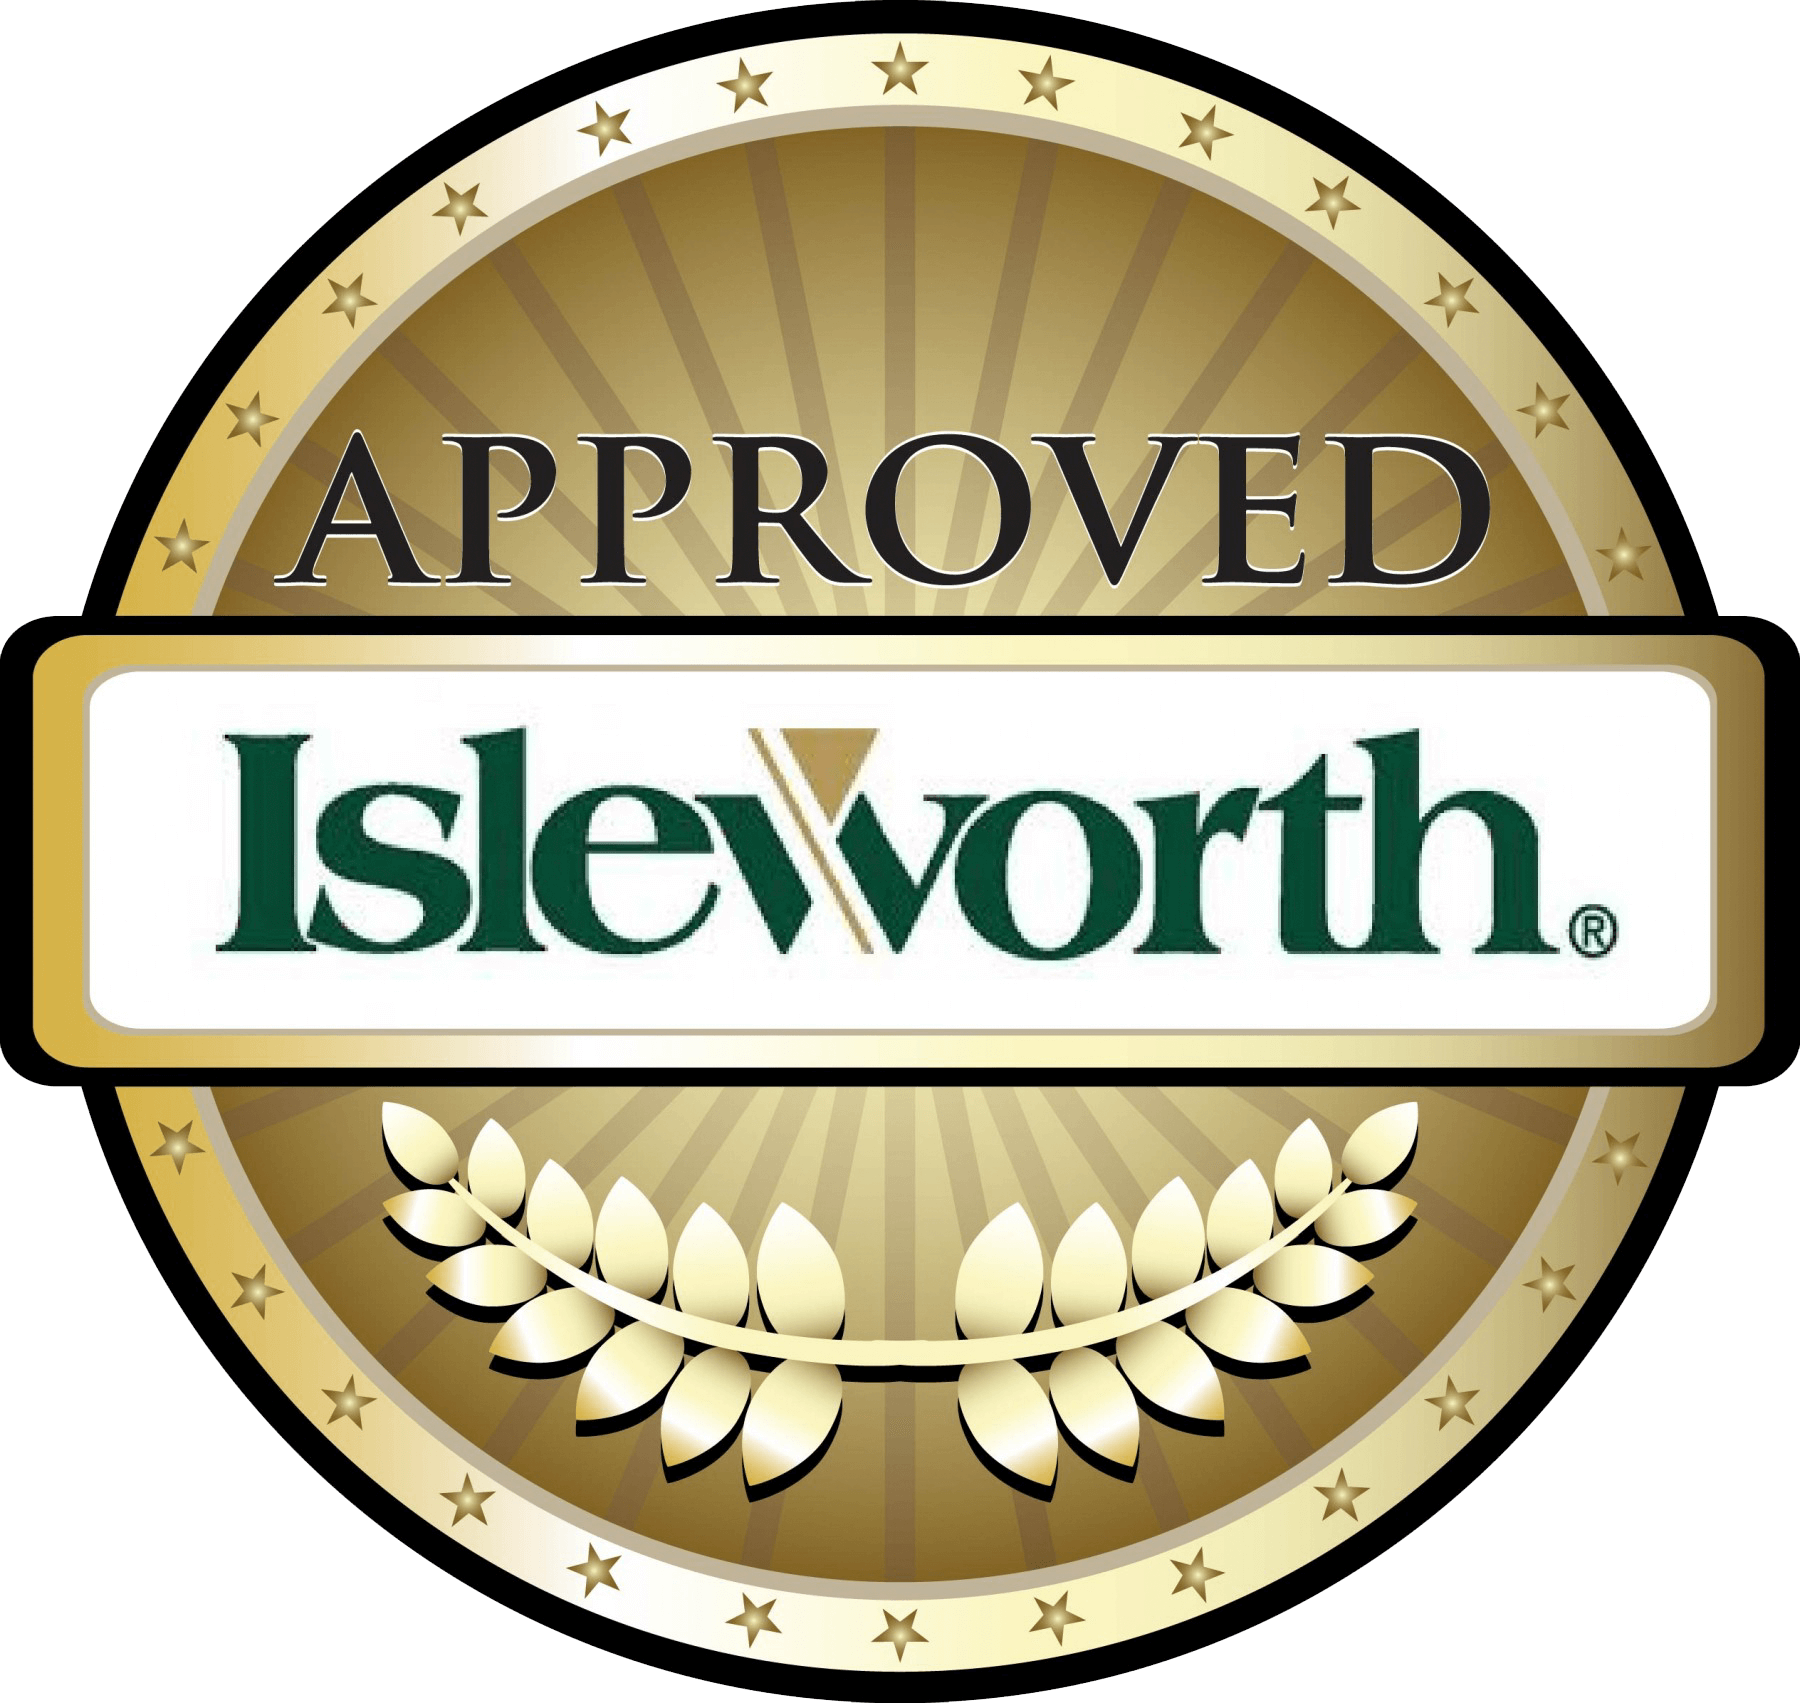 Approved Isleworth logo